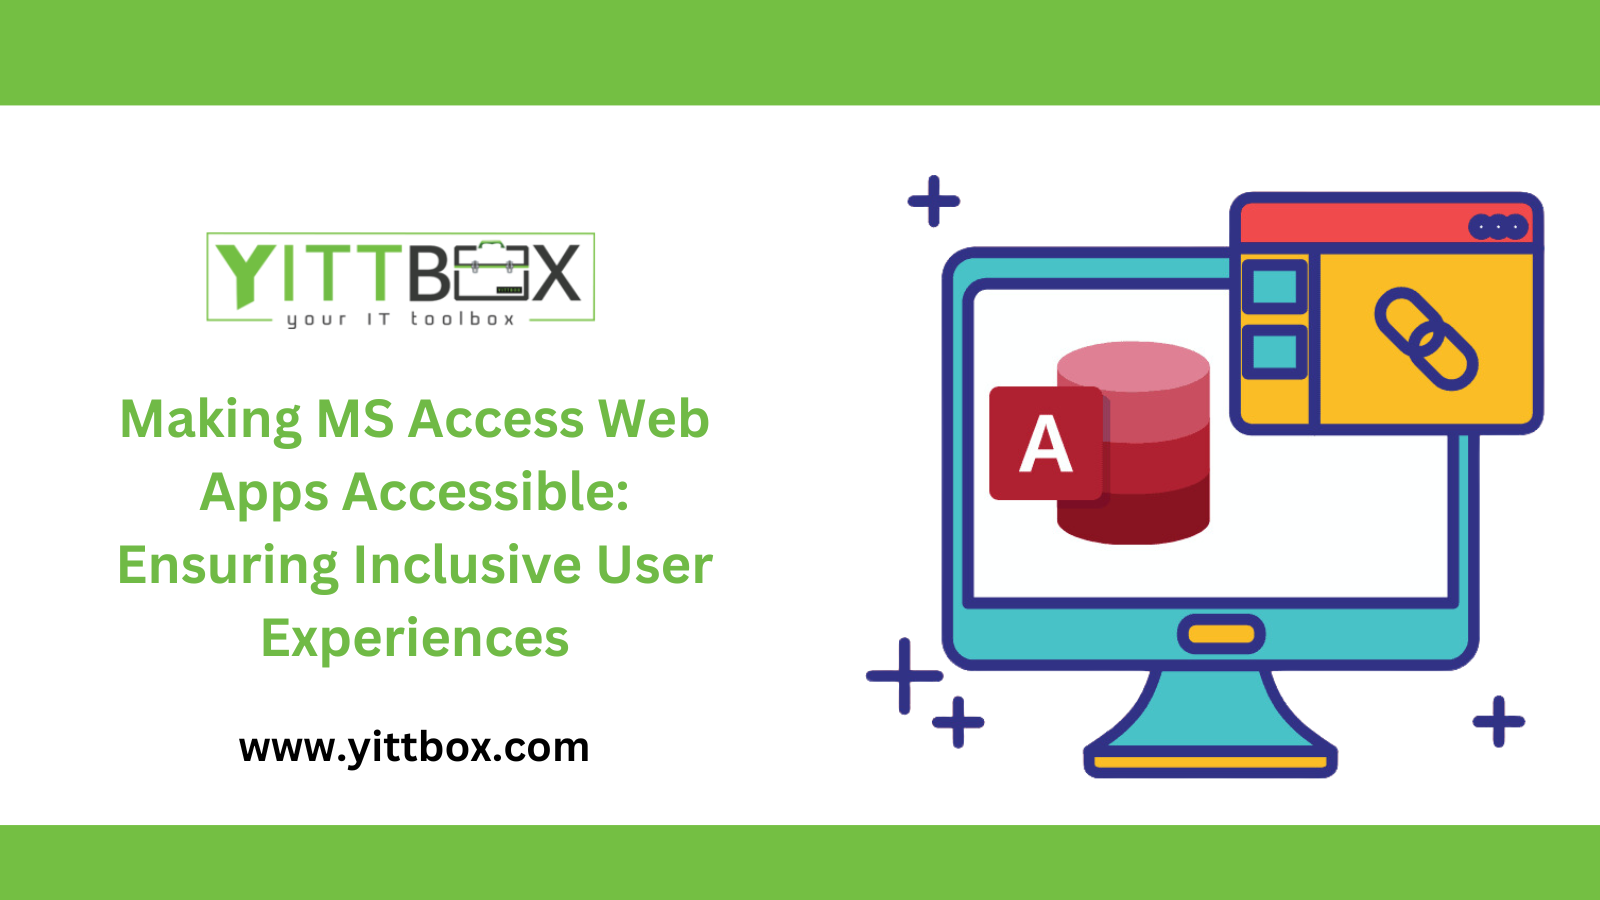 Making MS Access Web Apps Accessible: Ensuring Inclusive User Experiences